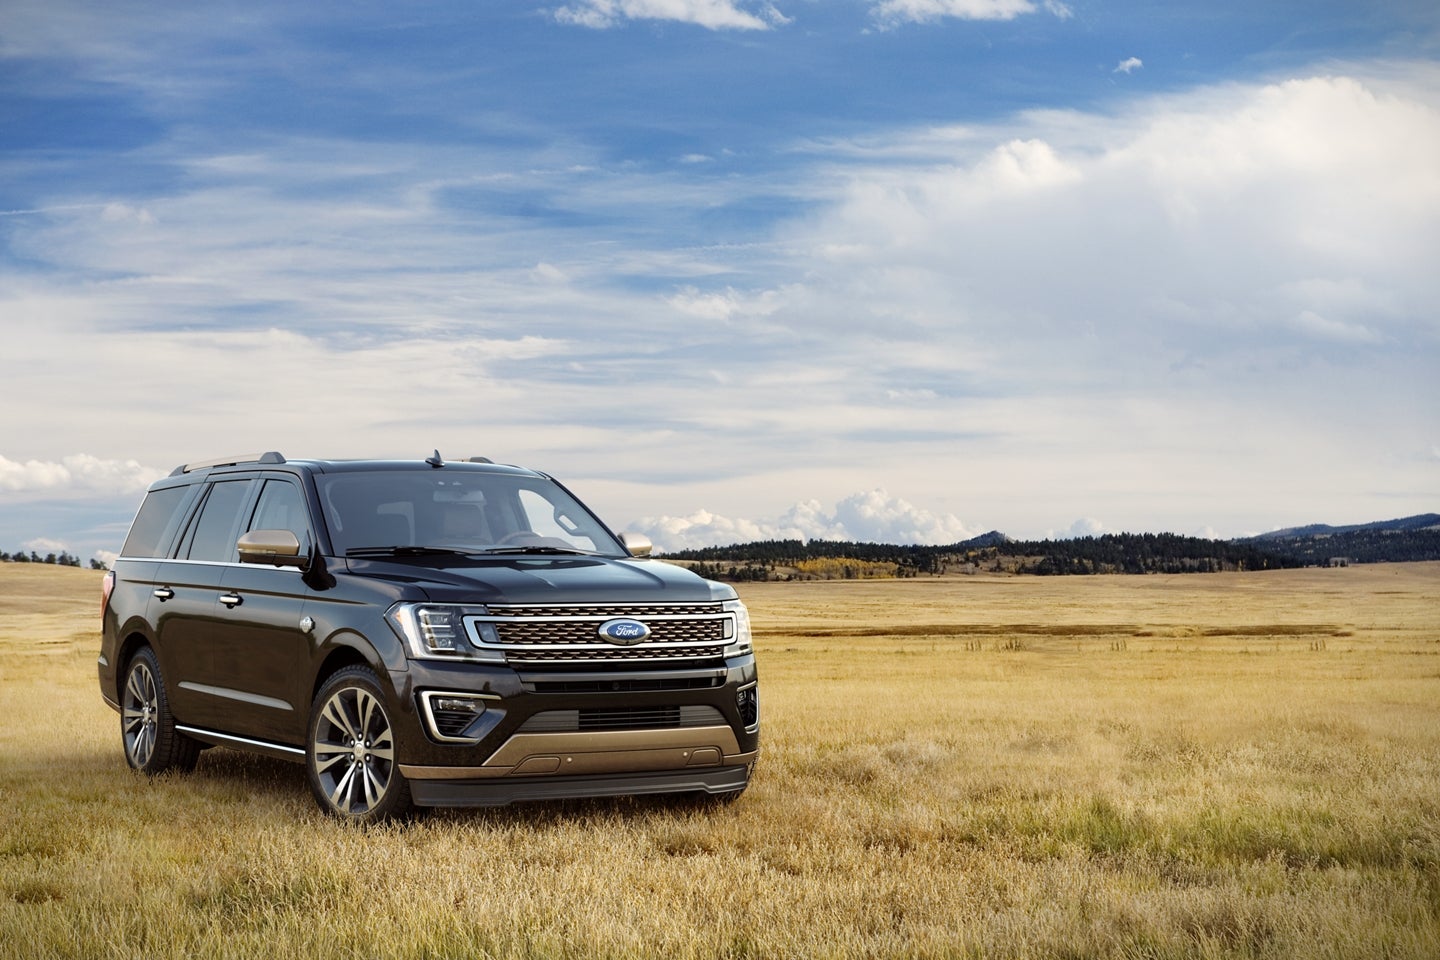 2020 Ford Expedition Lease near Fort Rucker, AL